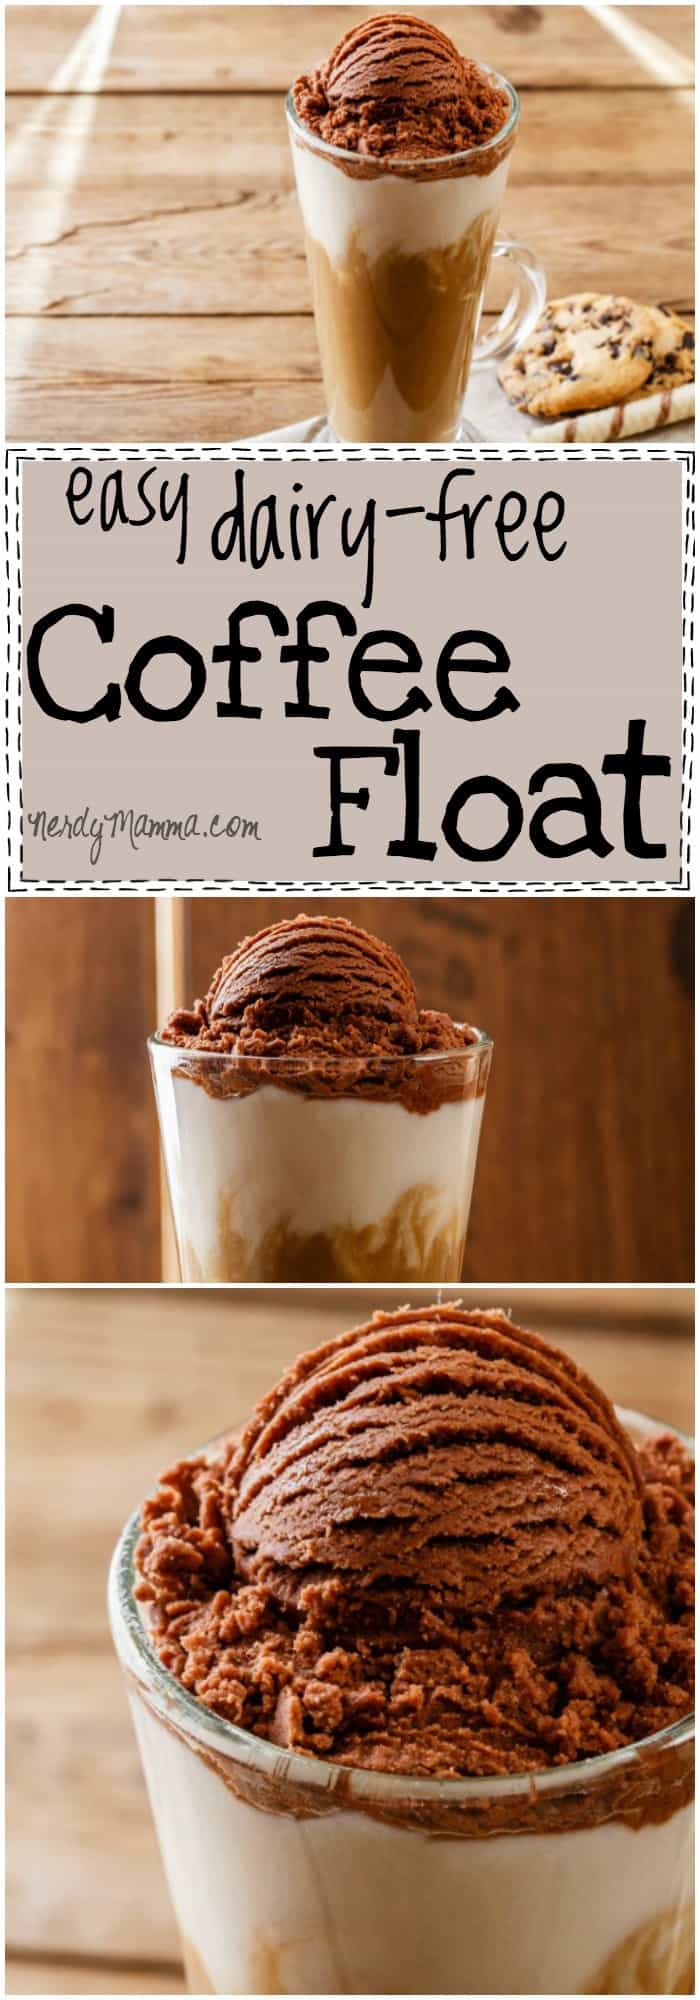 Ok, so this recipe for Dairy-Free Coffee Float is borderline genius. I mean, coffee, creamer, whipped cream, chocolate ice cream...so many awesome things happening here, I just can't even...LOVE!